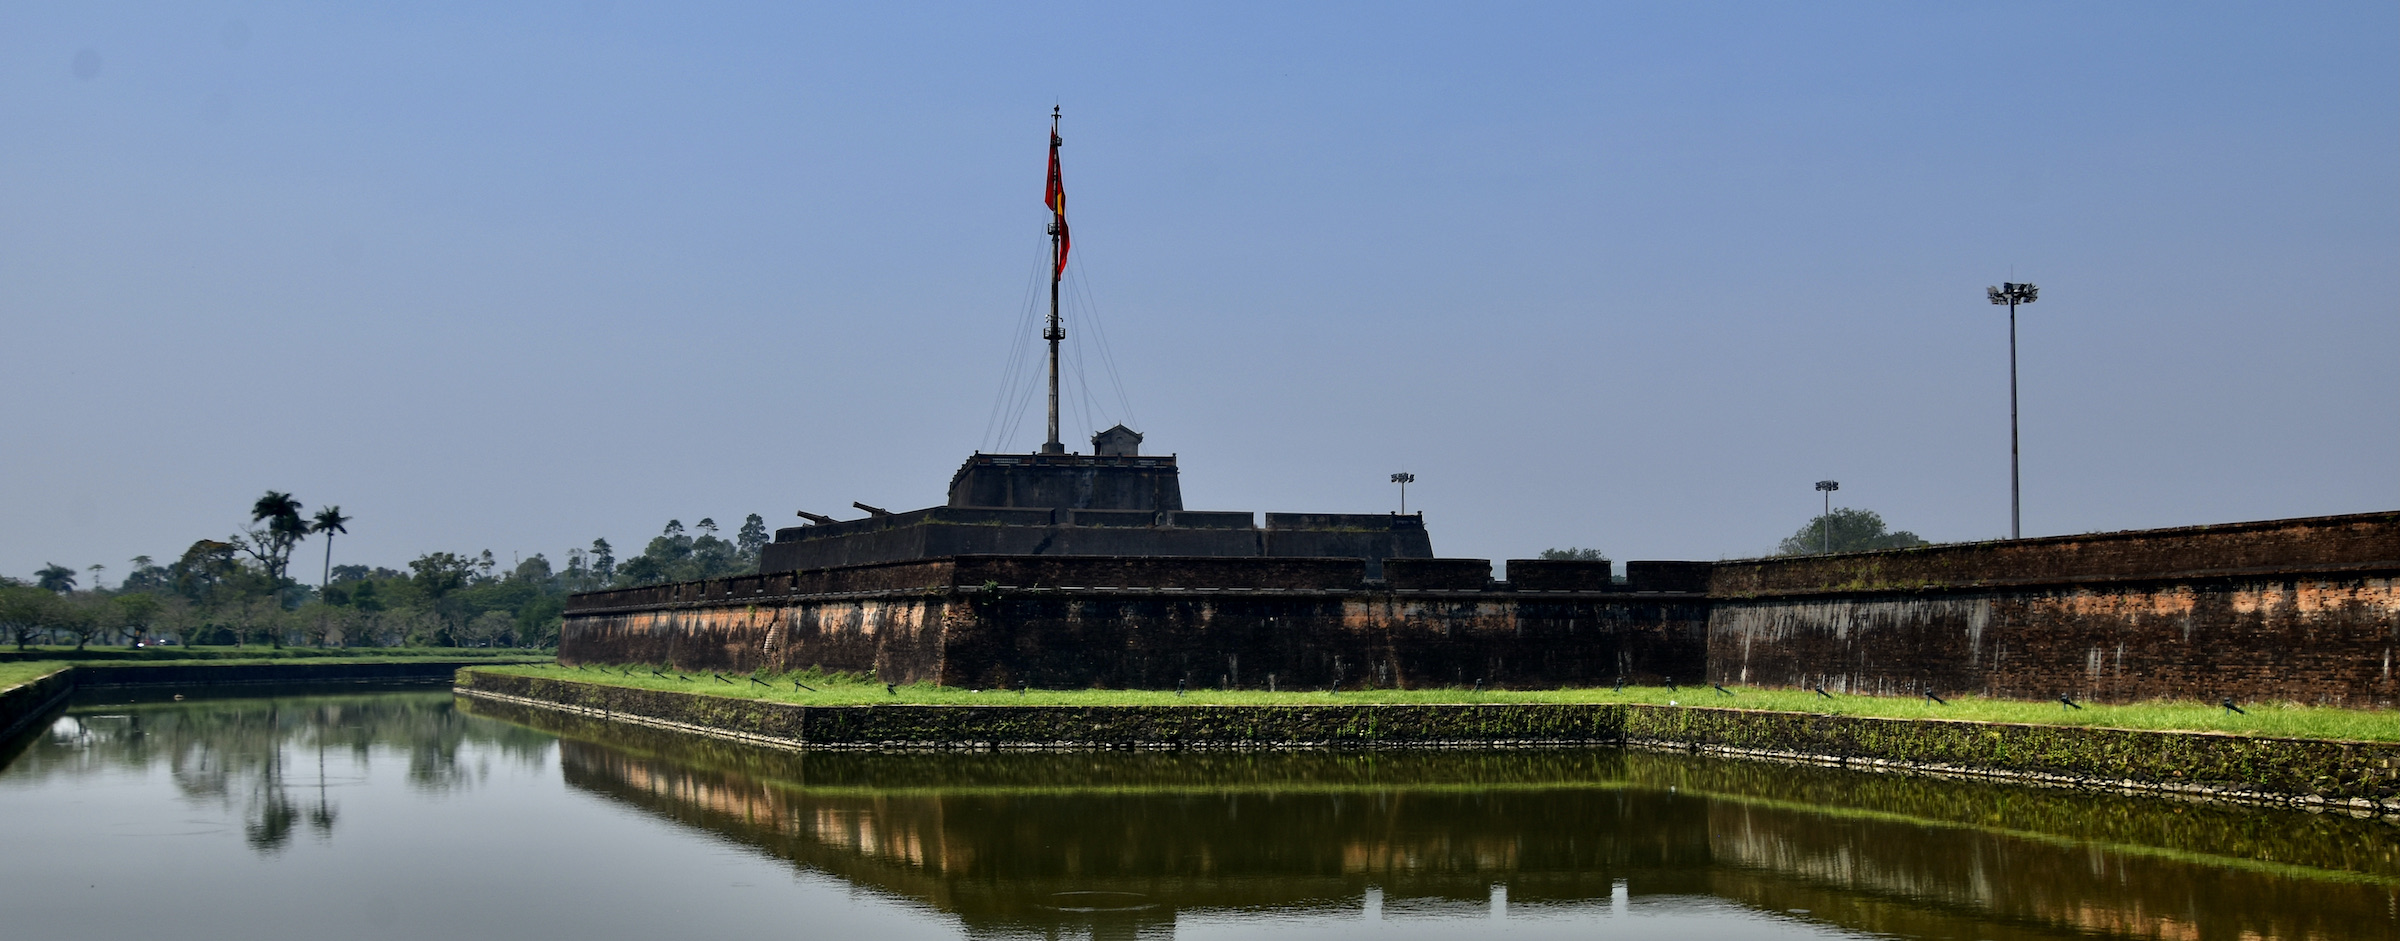 The Approach to the Citadel of Hue